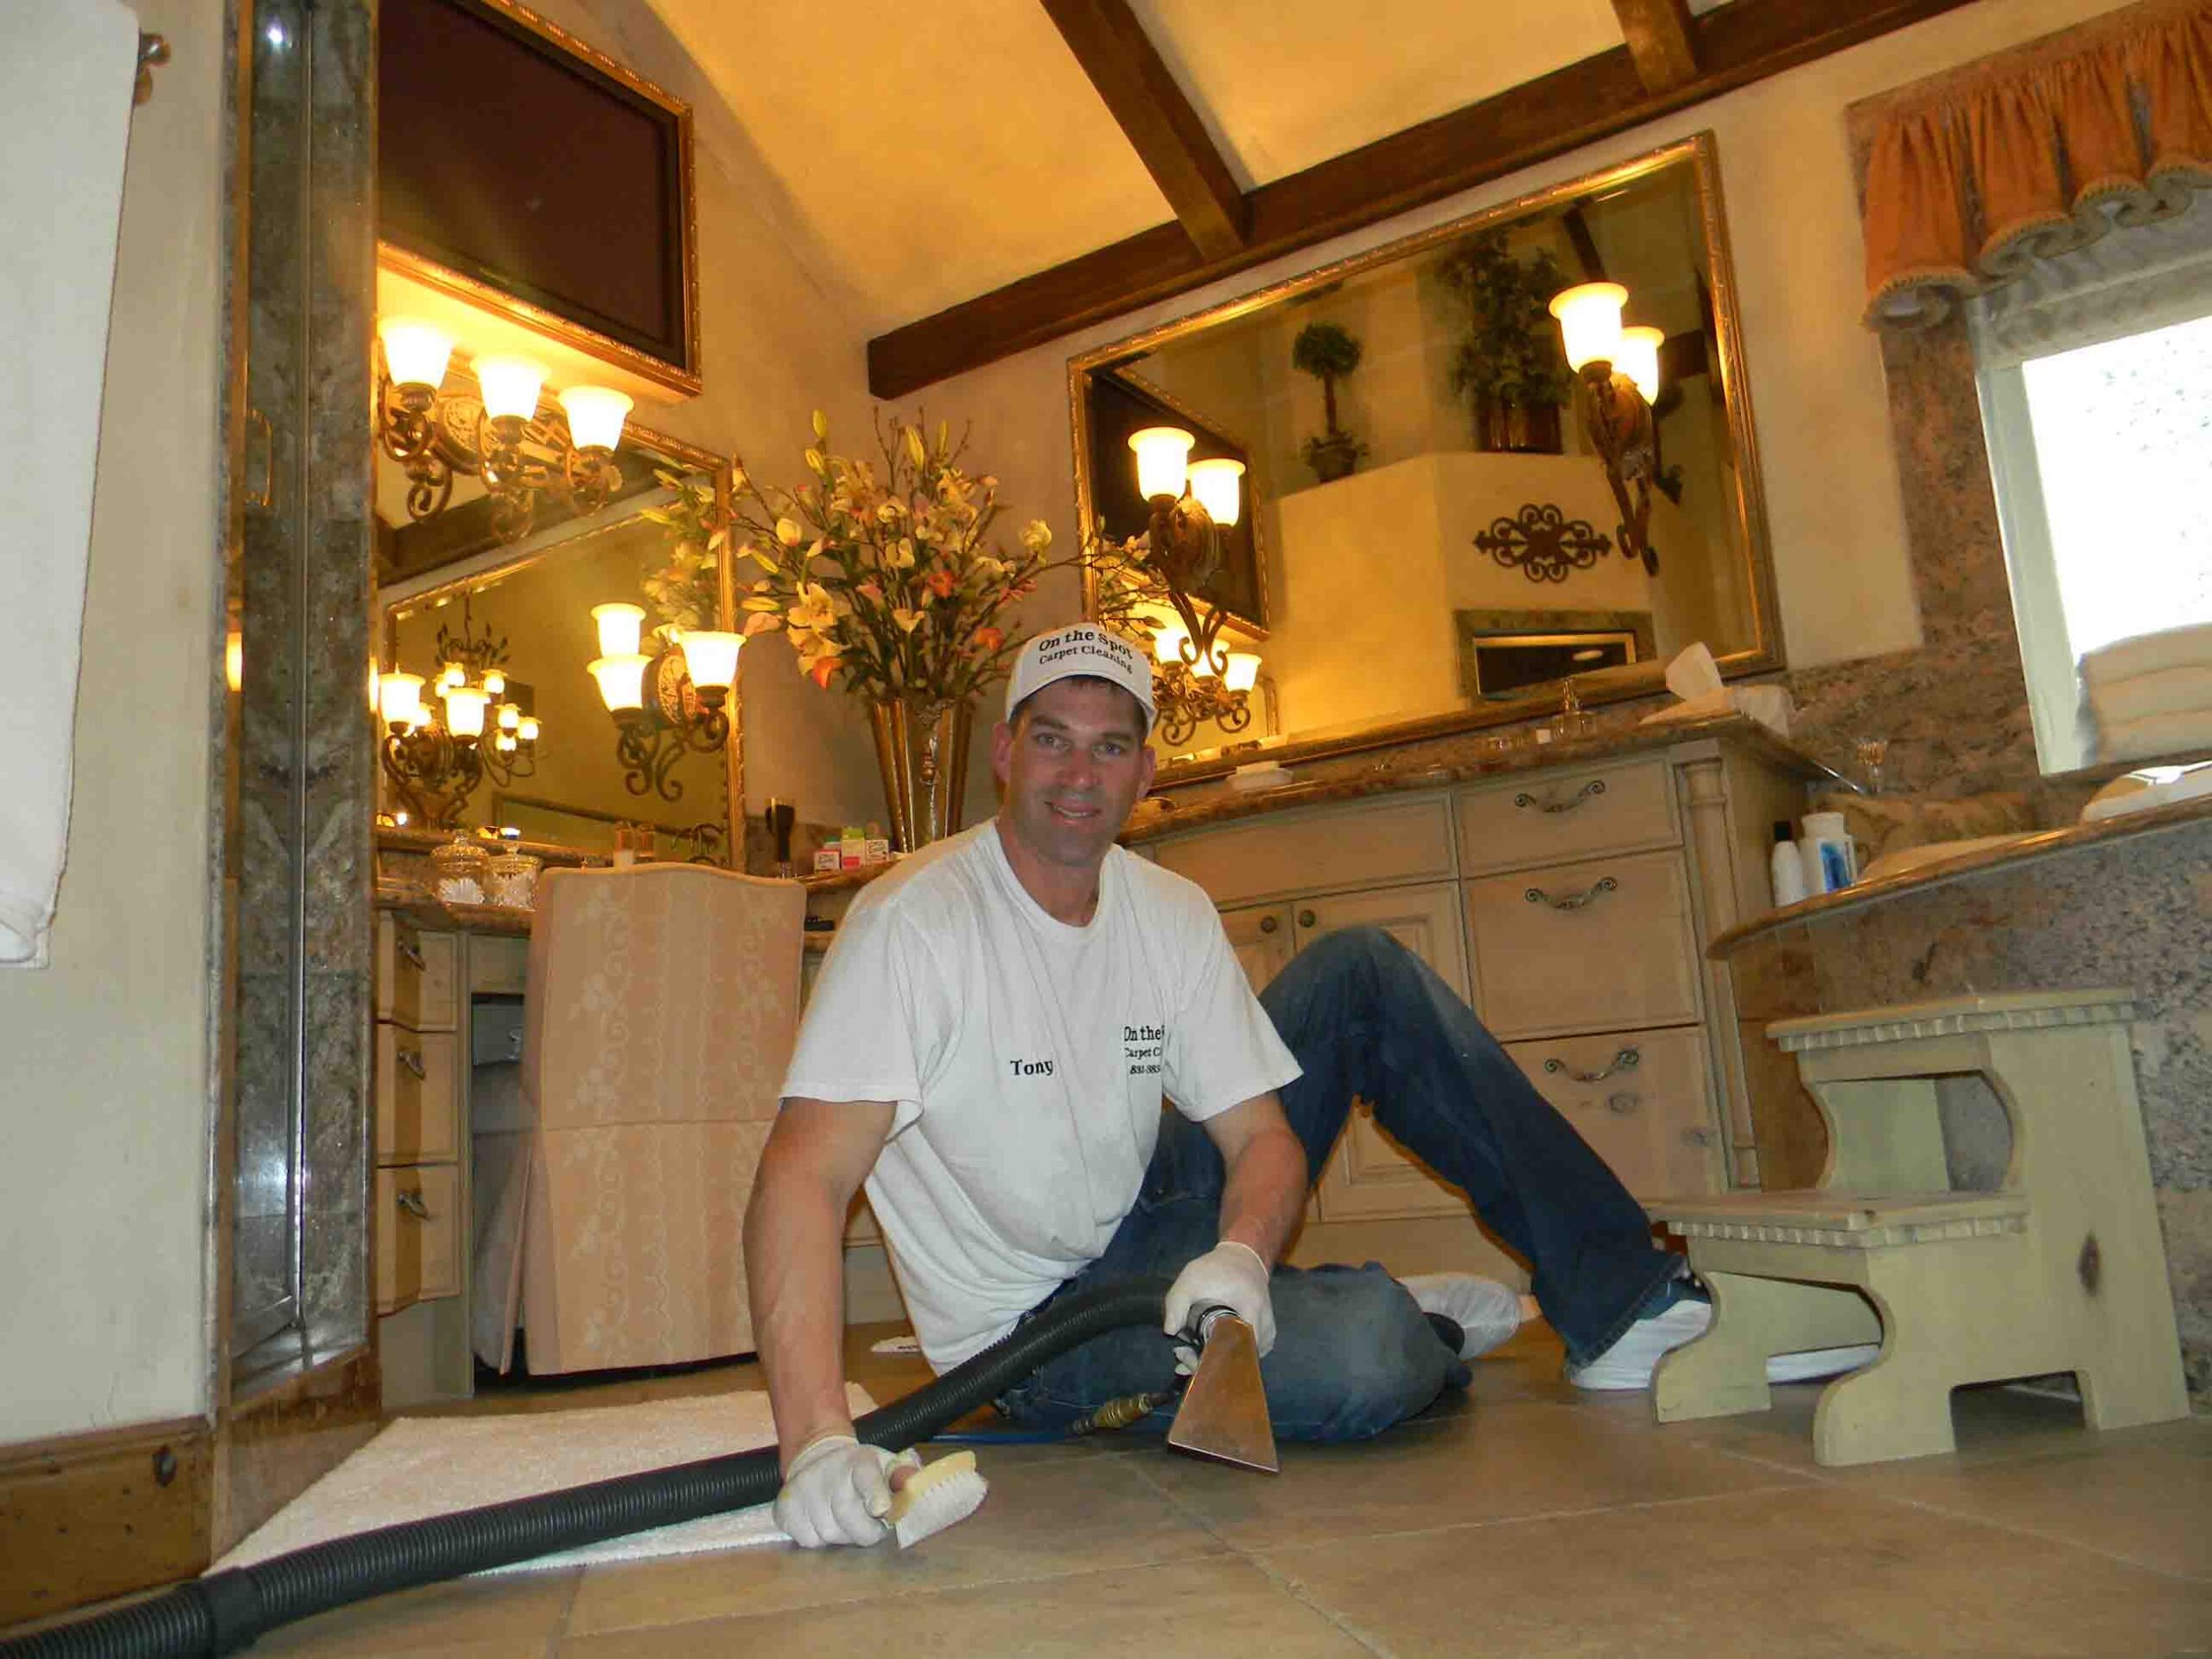 On-The-Spot Cleaning Services - Tony, owner, is sitting in a luxurious bathroom, cleaning the floor. There is a flat-screen mounted on the wall.